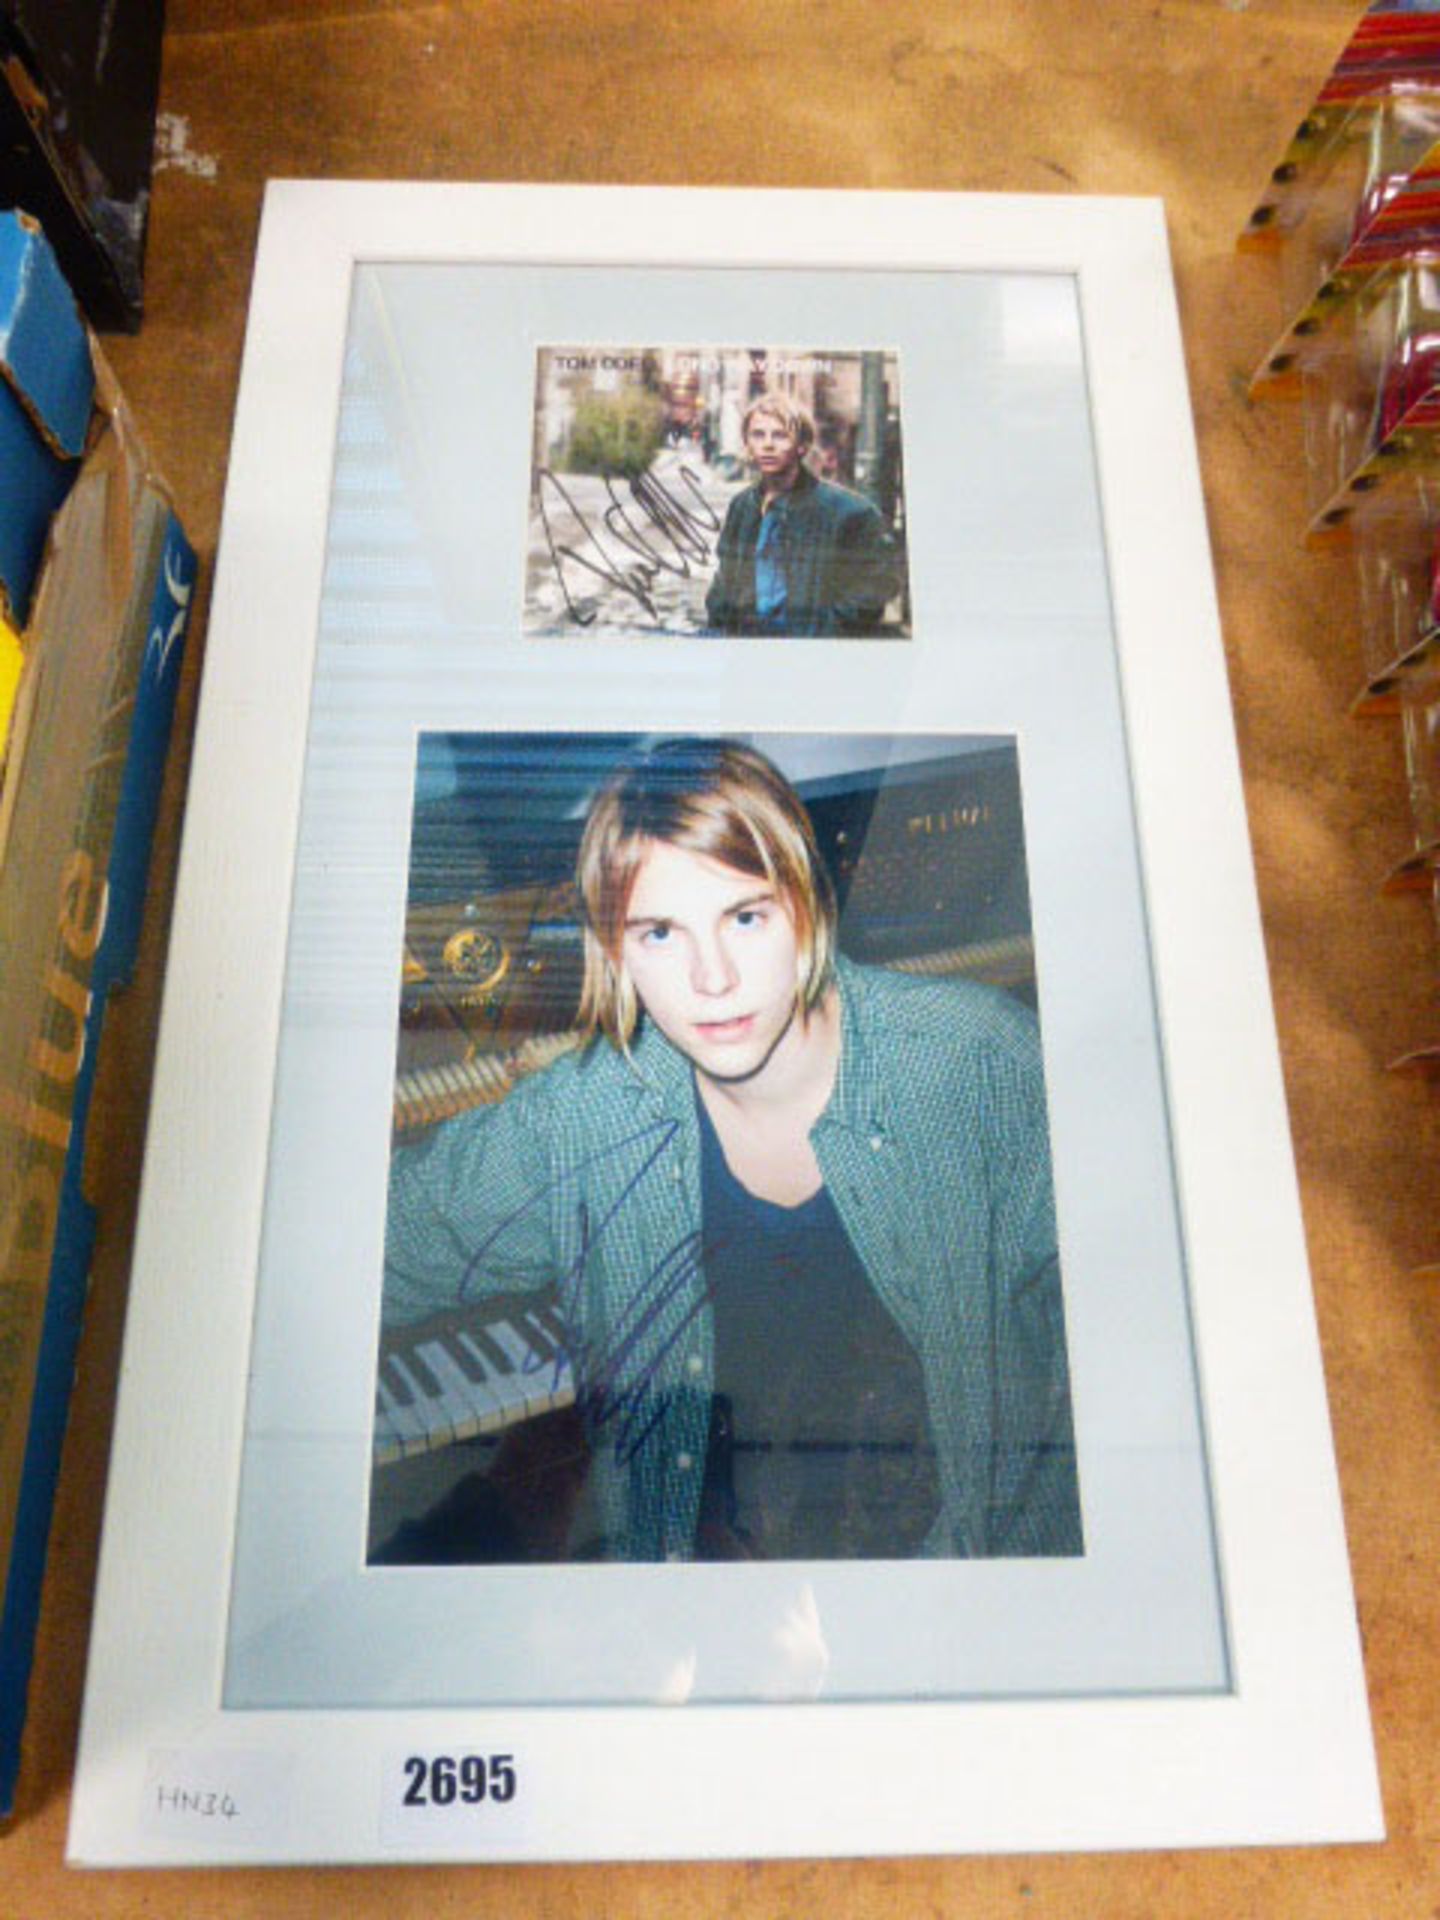 2640 Framed and glazed pictures of Tom Odell, signed (unverified)